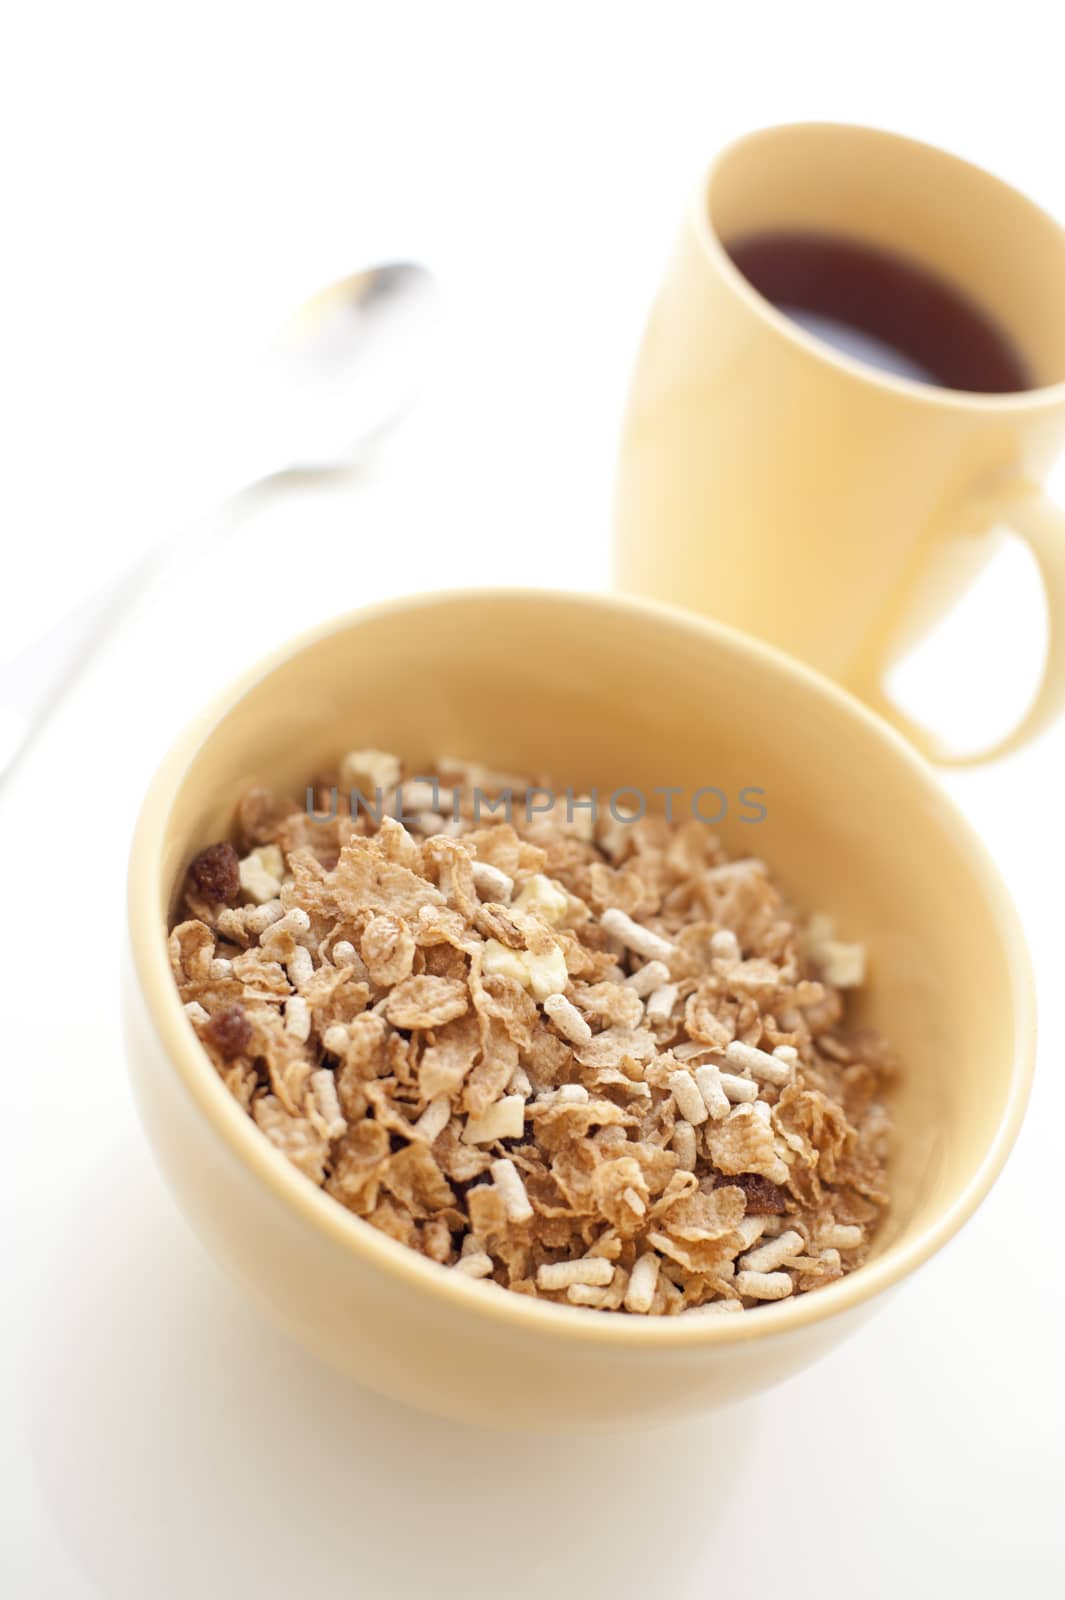 Healthy bowl of muesli breakfast cereal served with mug of aromatic hot espresso coffee for an energising start to the day